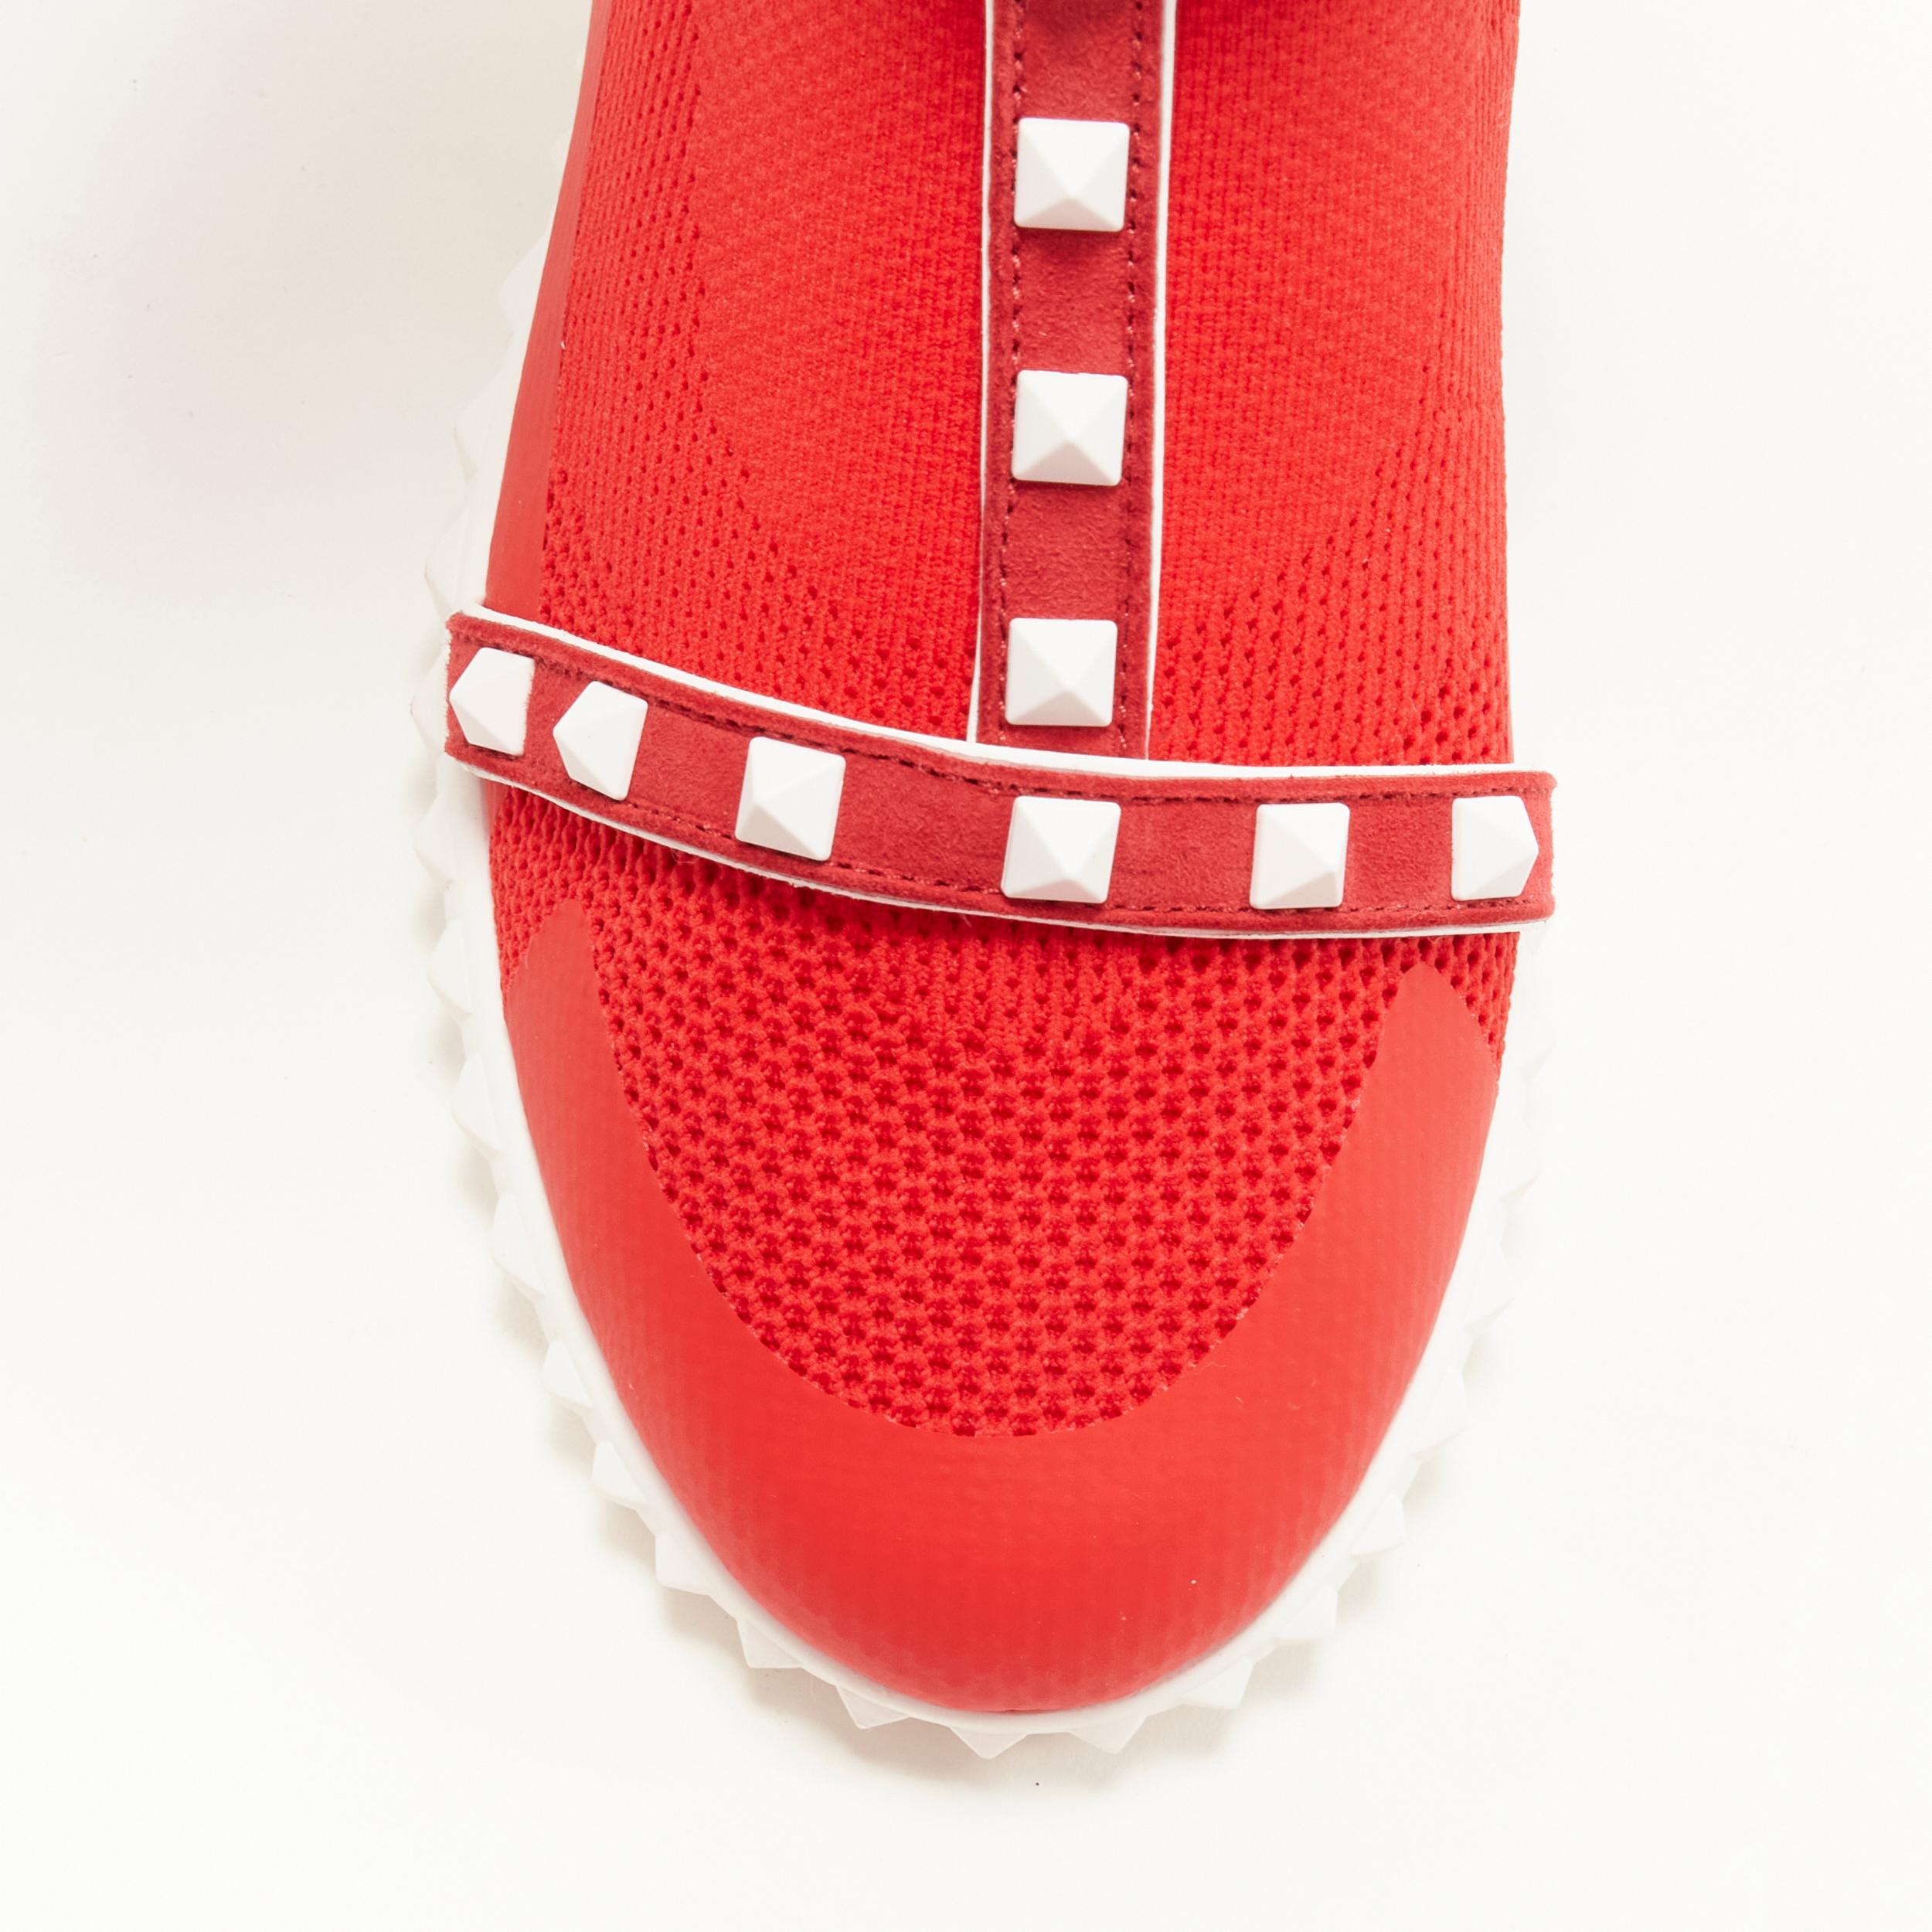 VALENTINO Free Rockstud Bodytech red sock knit white stud high top sneaker EU36 For Sale 1